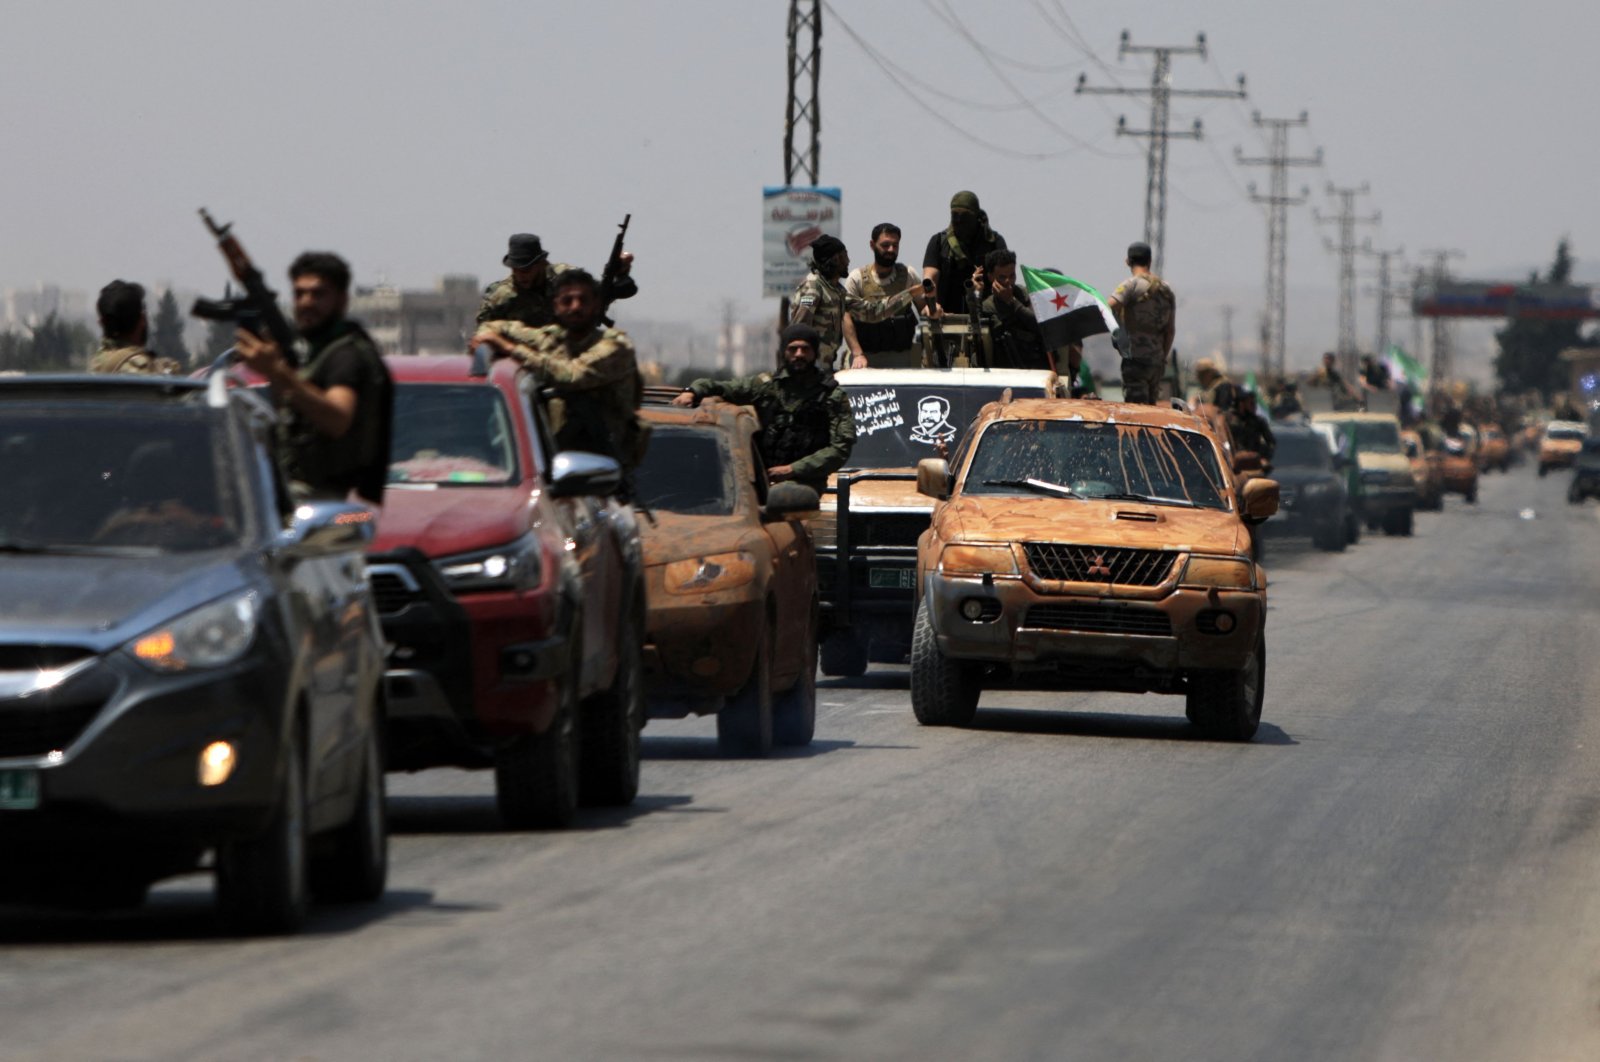 Turkish-backed Syrian opposition forces are pictured in the border town of Azaz in the opposition-held northern part of the Aleppo province, as they head toward an area facing the YPG-controlled town of Tal Rifaat, Syria, June 9, 2022. (AFP Photo)